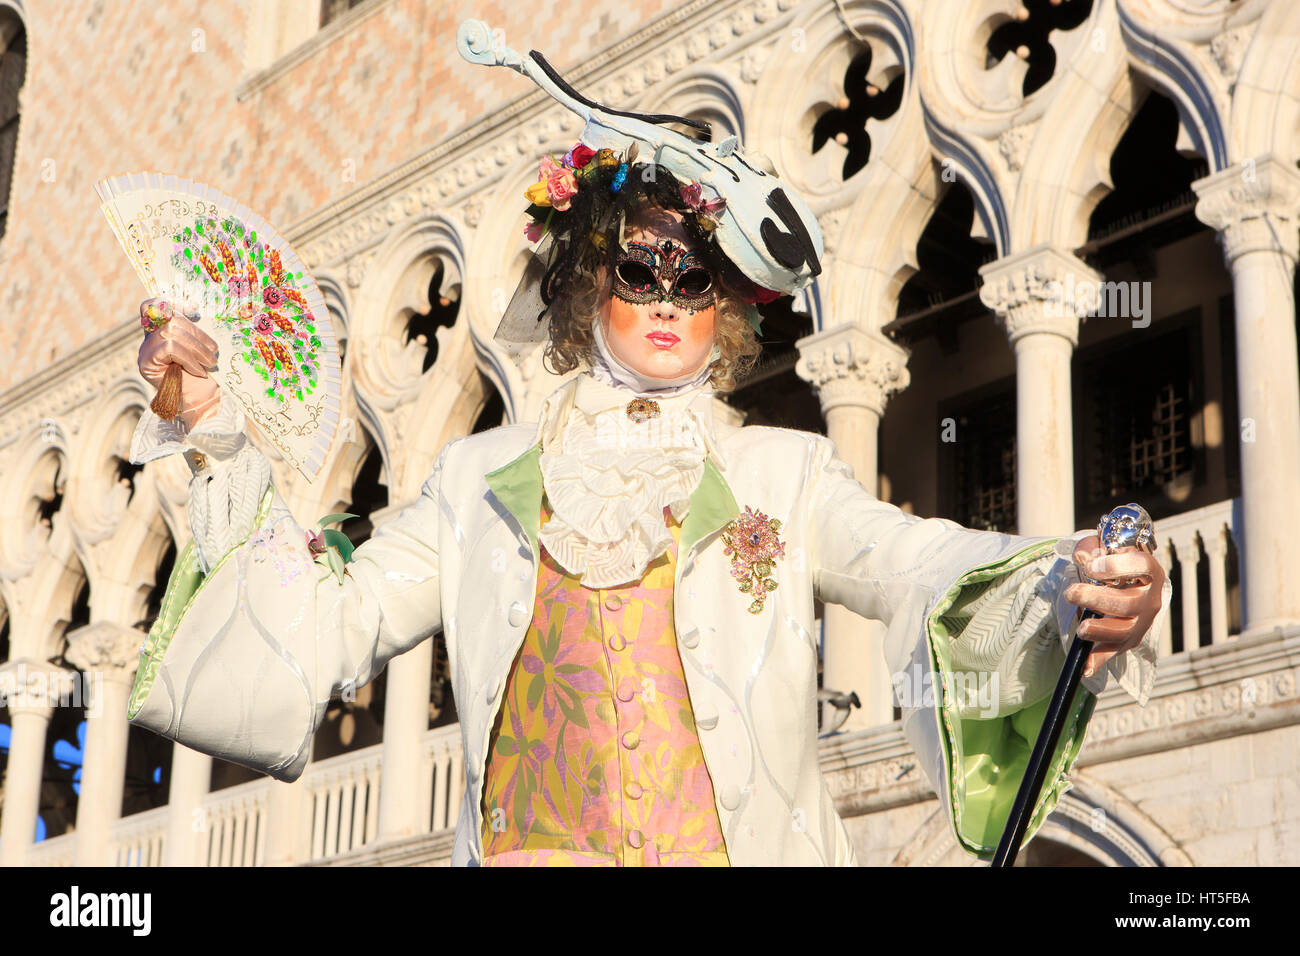 A man in a traditional Venetian costume outside the Doge's Palace during the Carnival of Venice, Italy Stock Photo